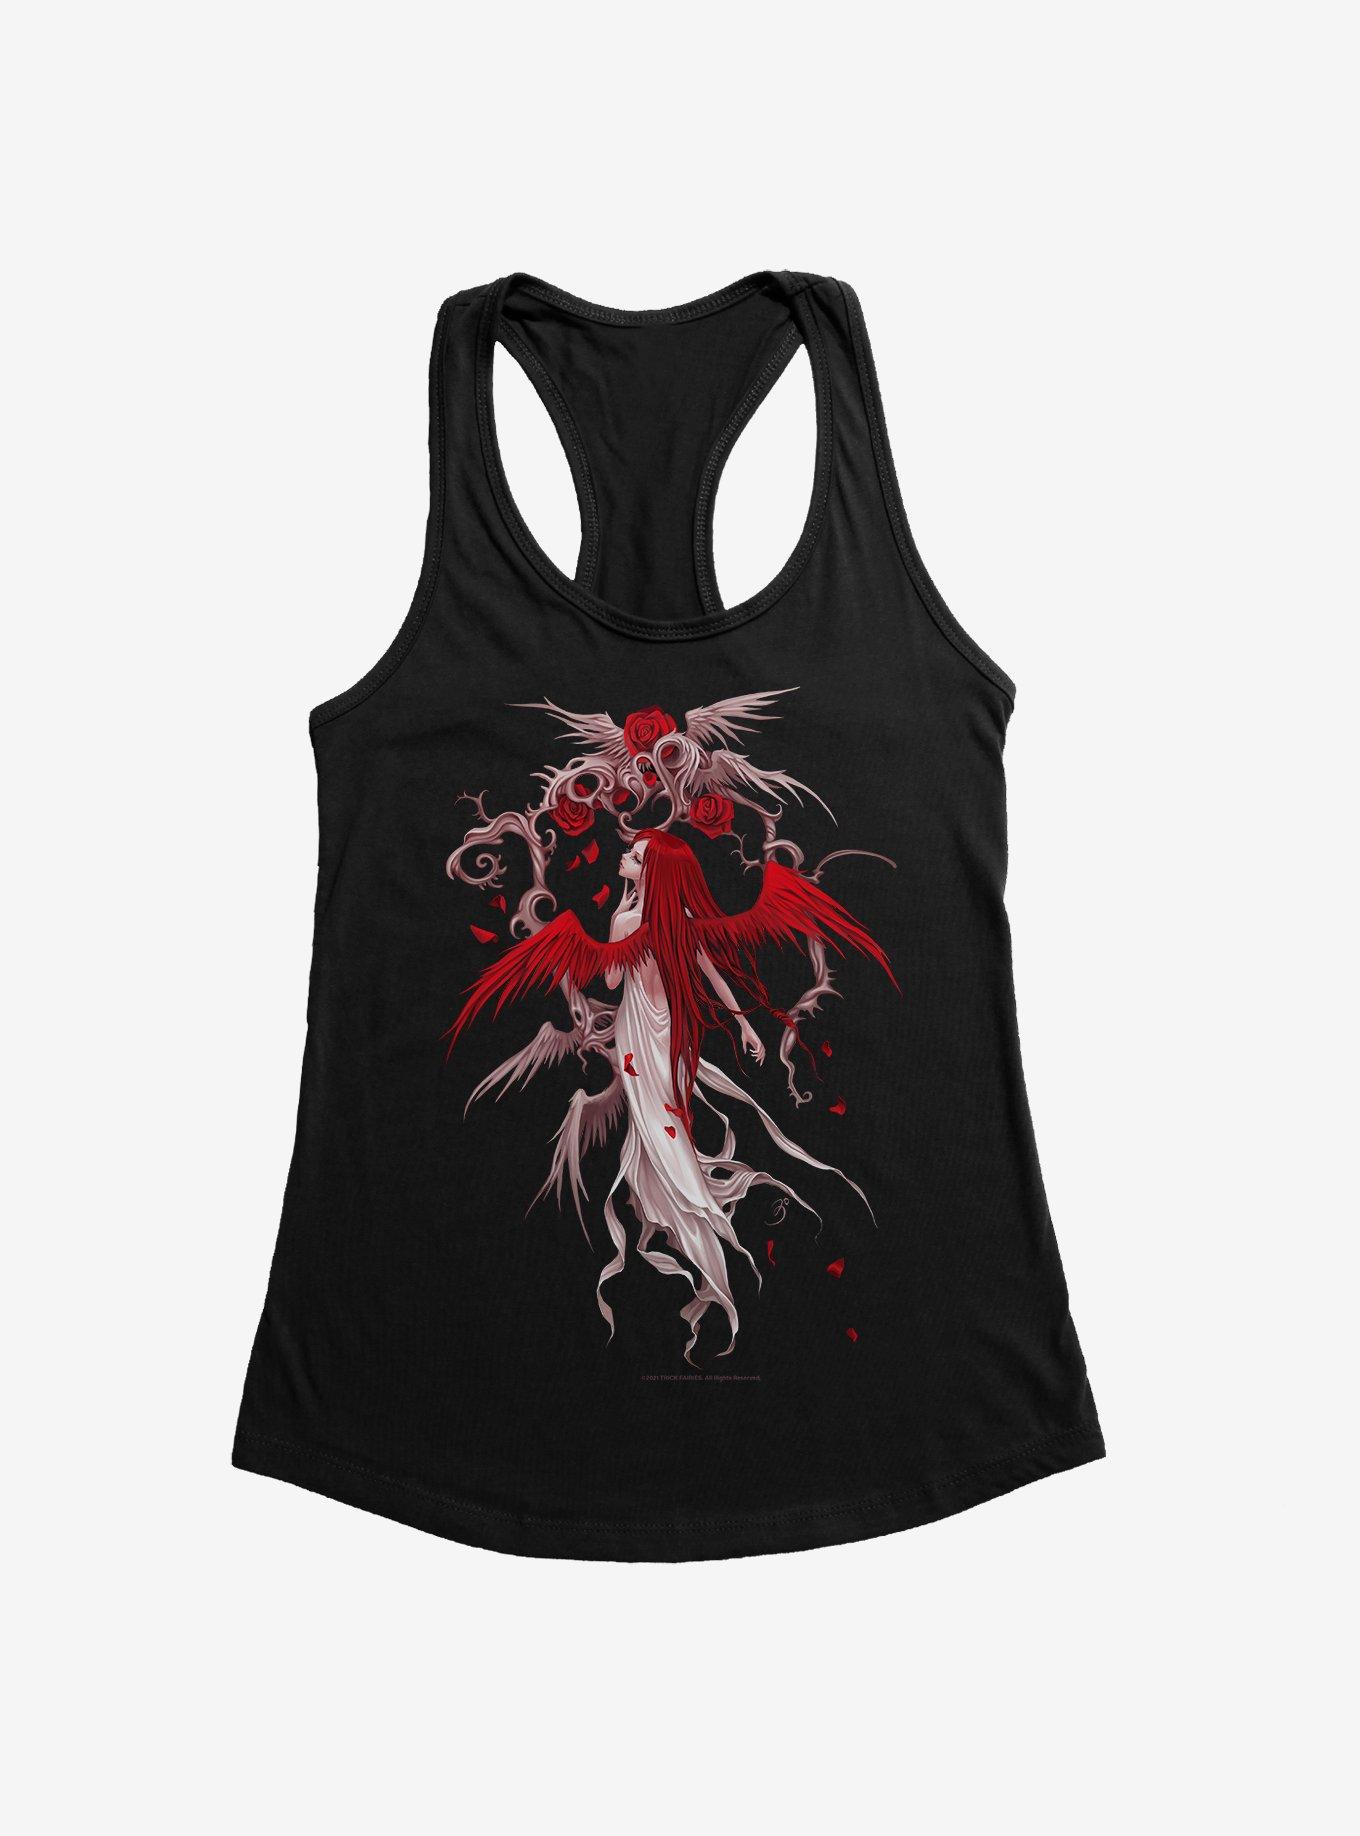 Fairies By Trick Red Rose Fairy Girls Tank